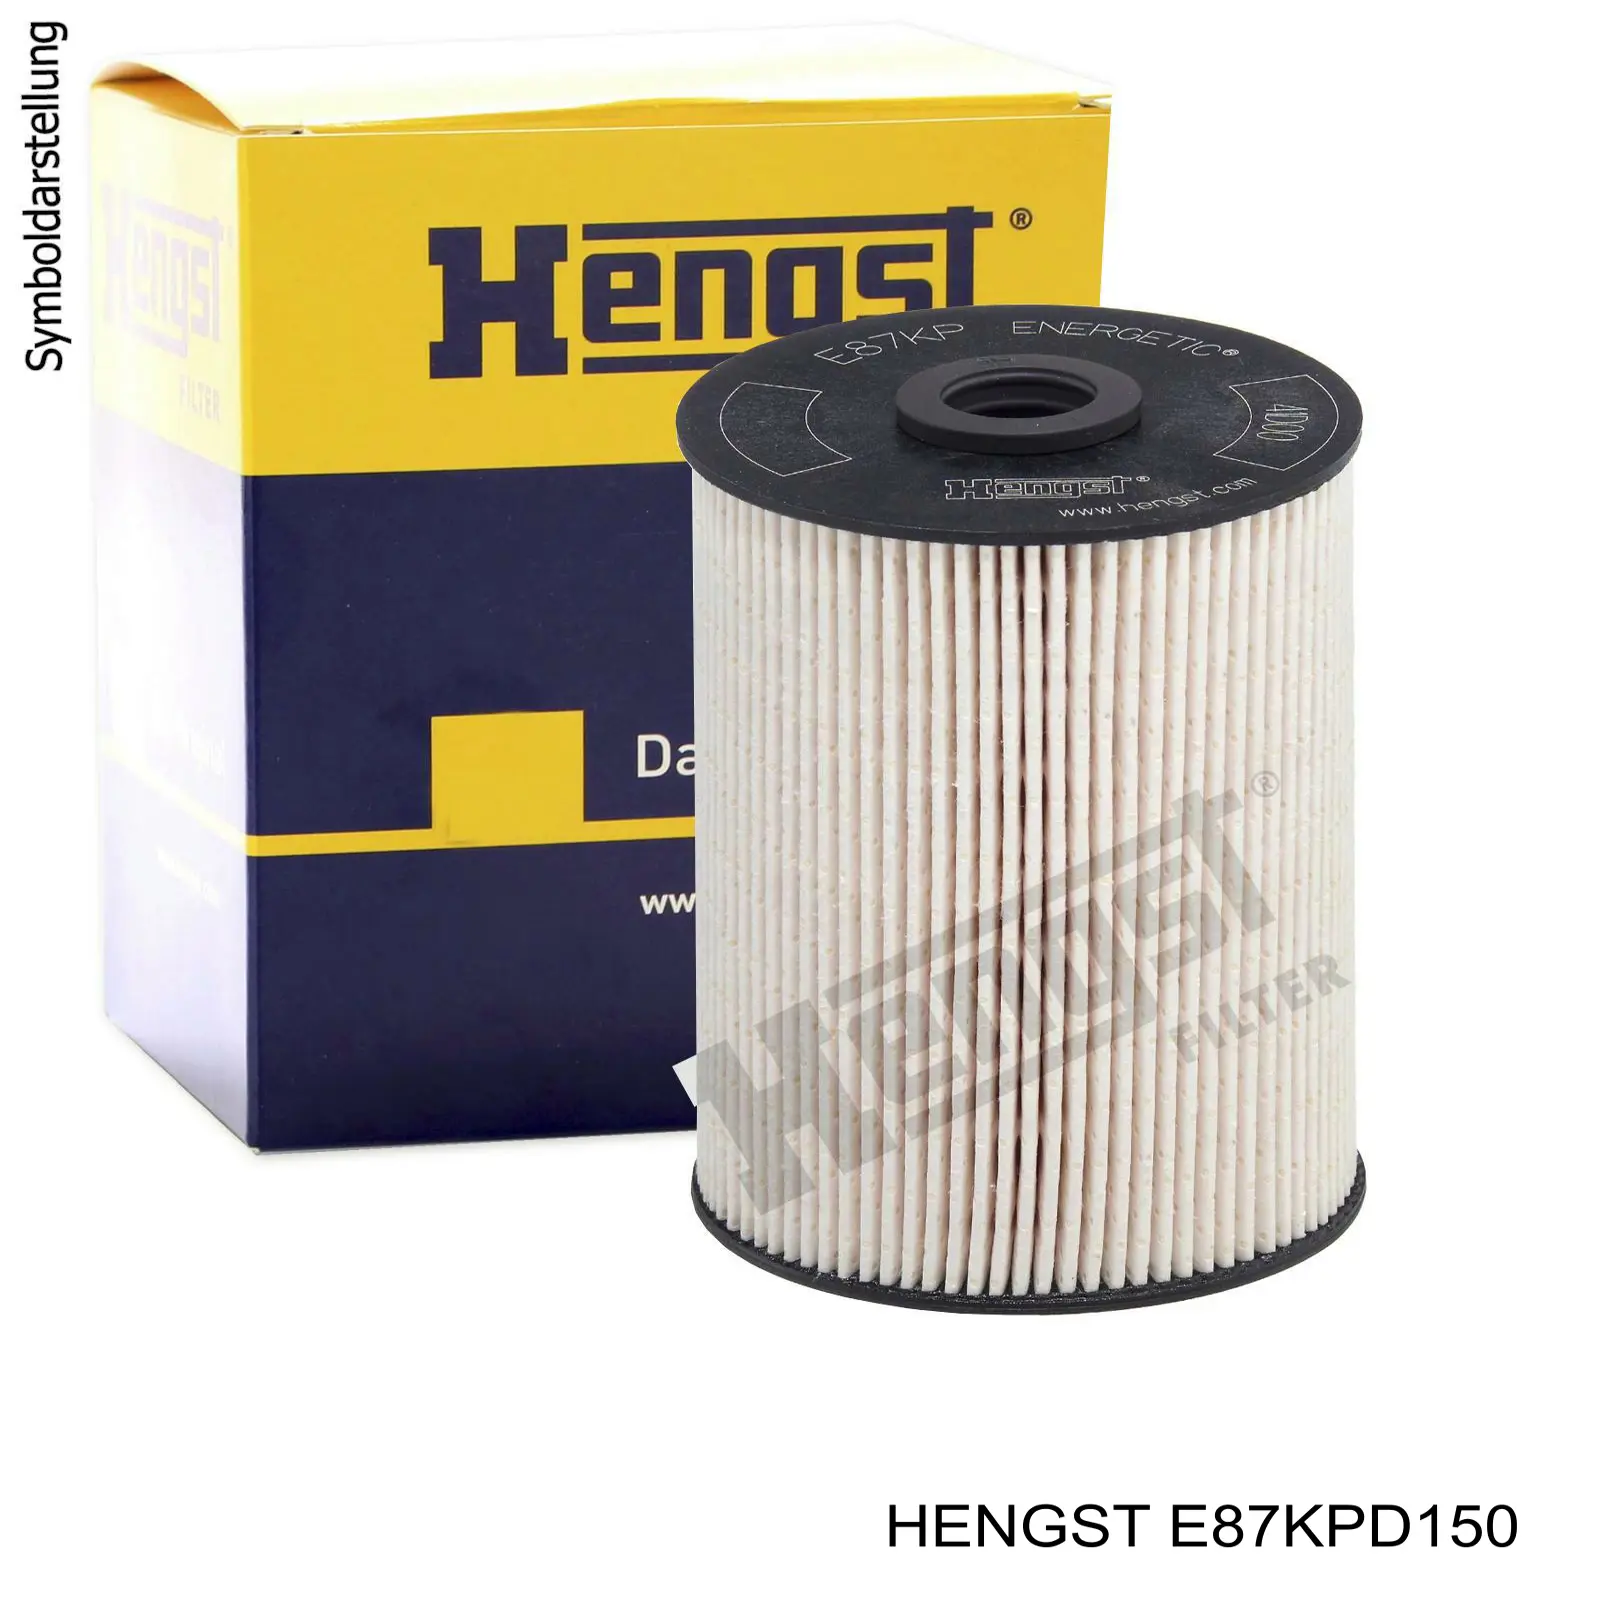 Filtro combustible E87KPD150 Hengst